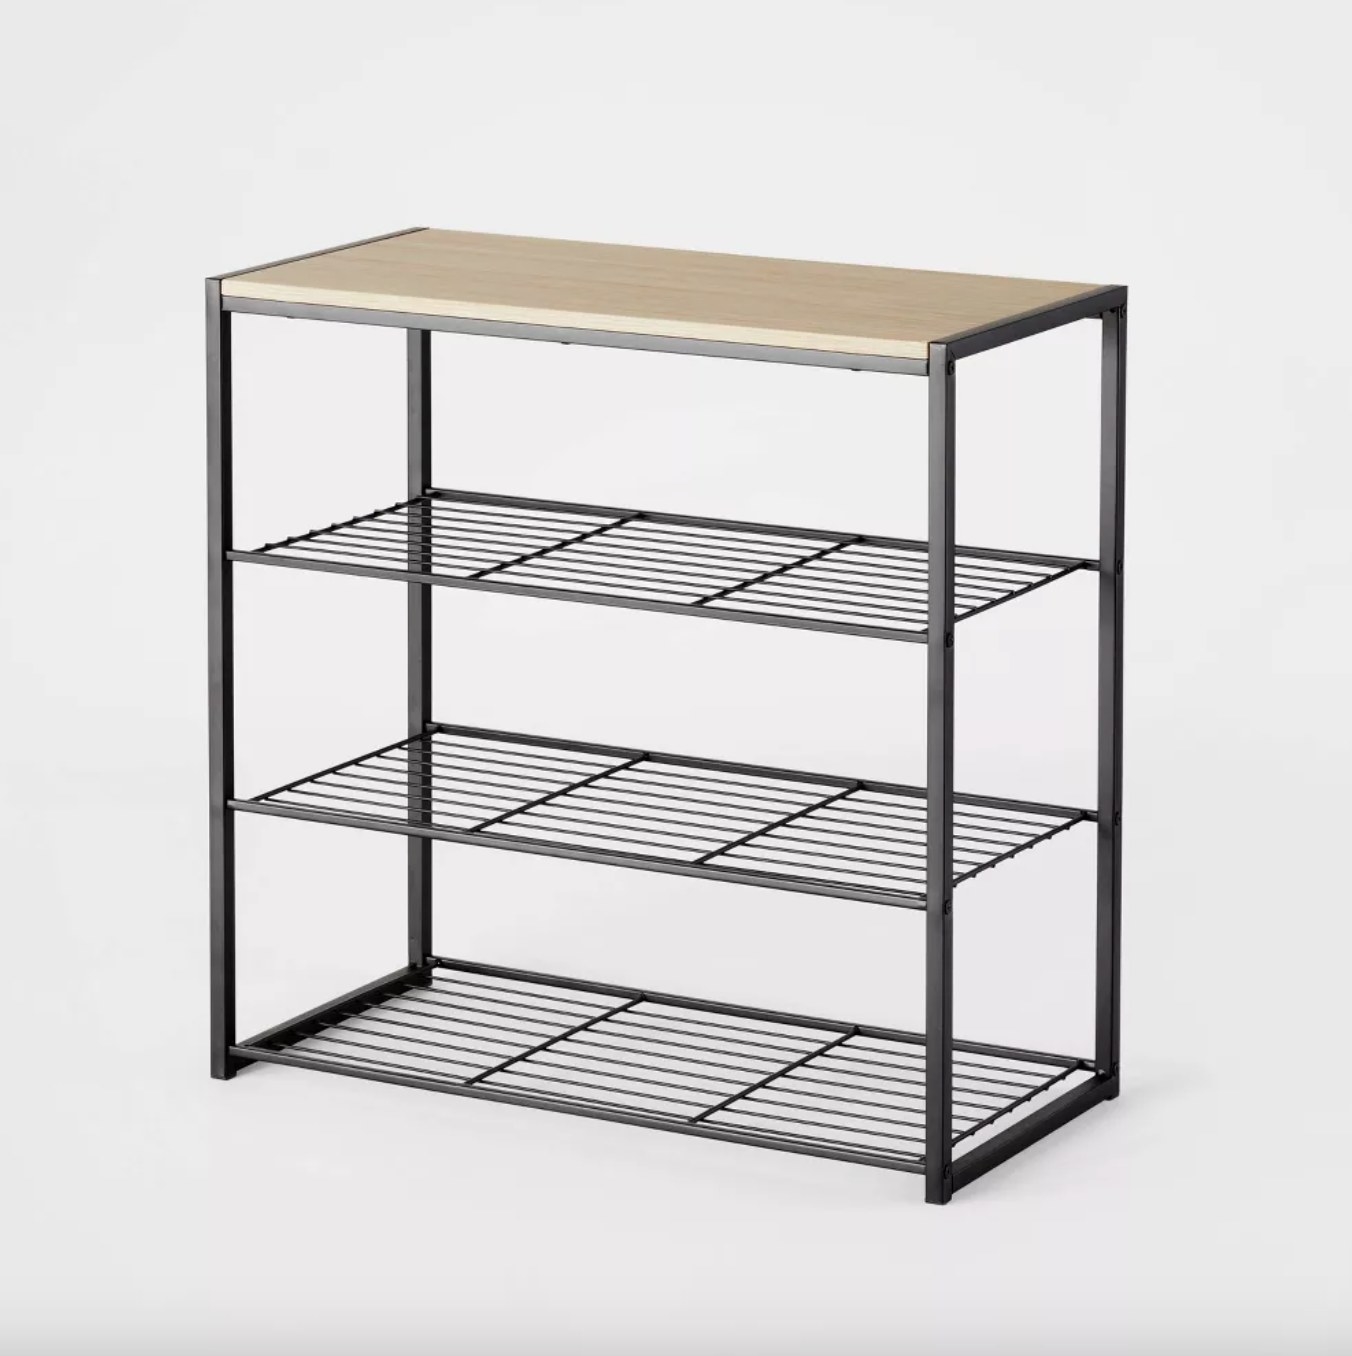 the black metal shoe rack with a light wooden top